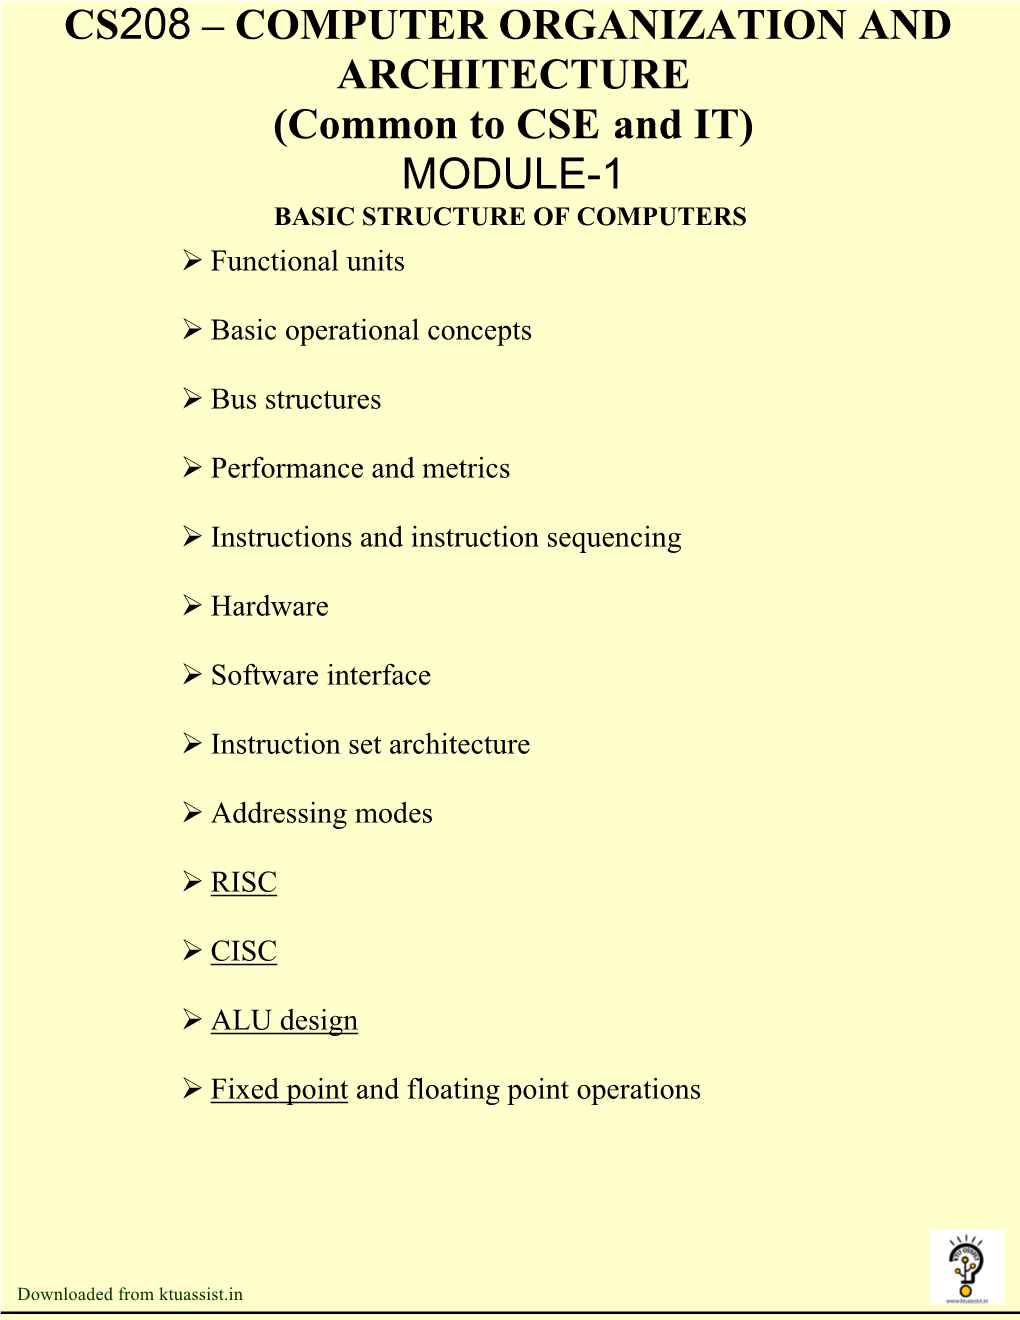 COMPUTER ORGANIZATION and ARCHITECTURE (Common to CSE and IT) MODULE-1 BASIC STRUCTURE of COMPUTERS  Functional Units